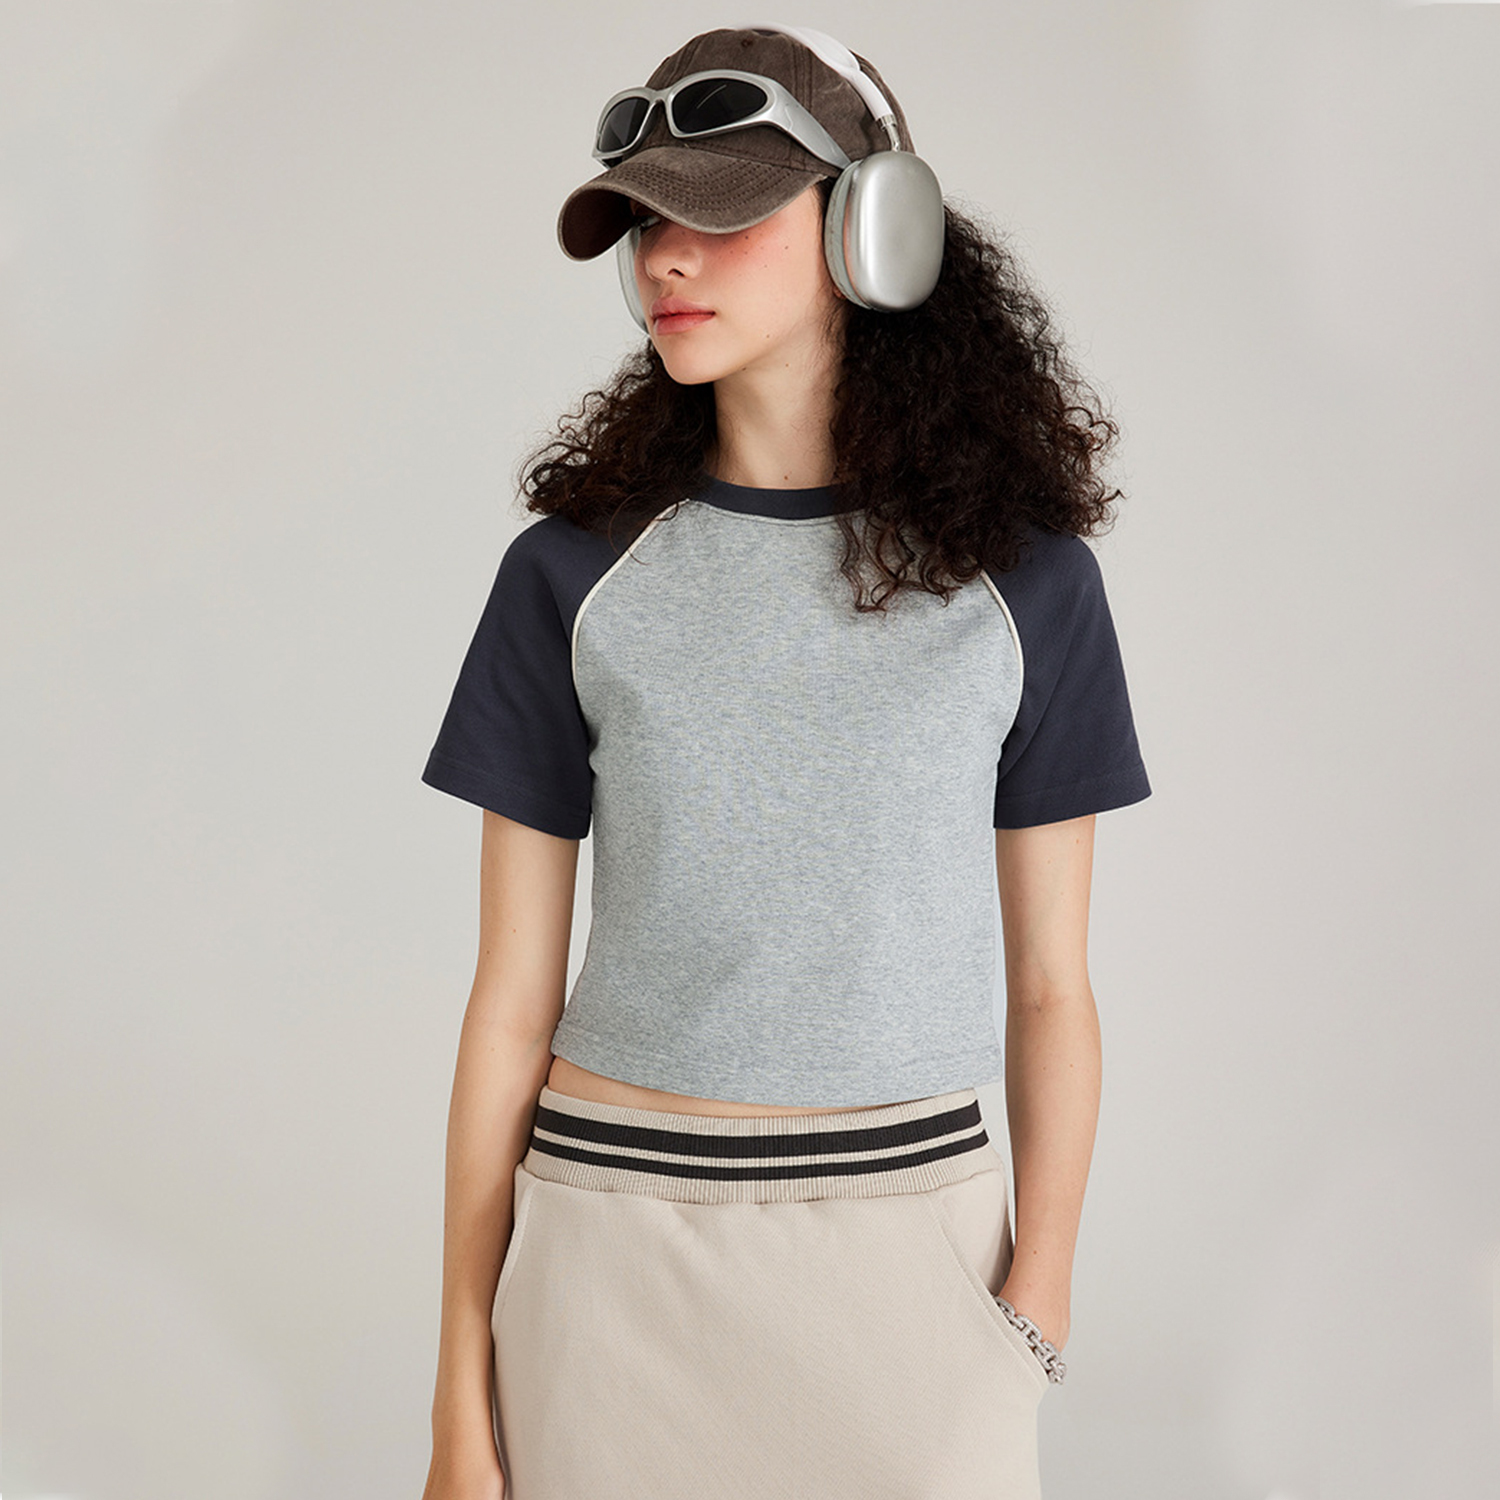 Streetwear Vintage Colorblock Fitted Cropped Gray Tee | HugePOD-1